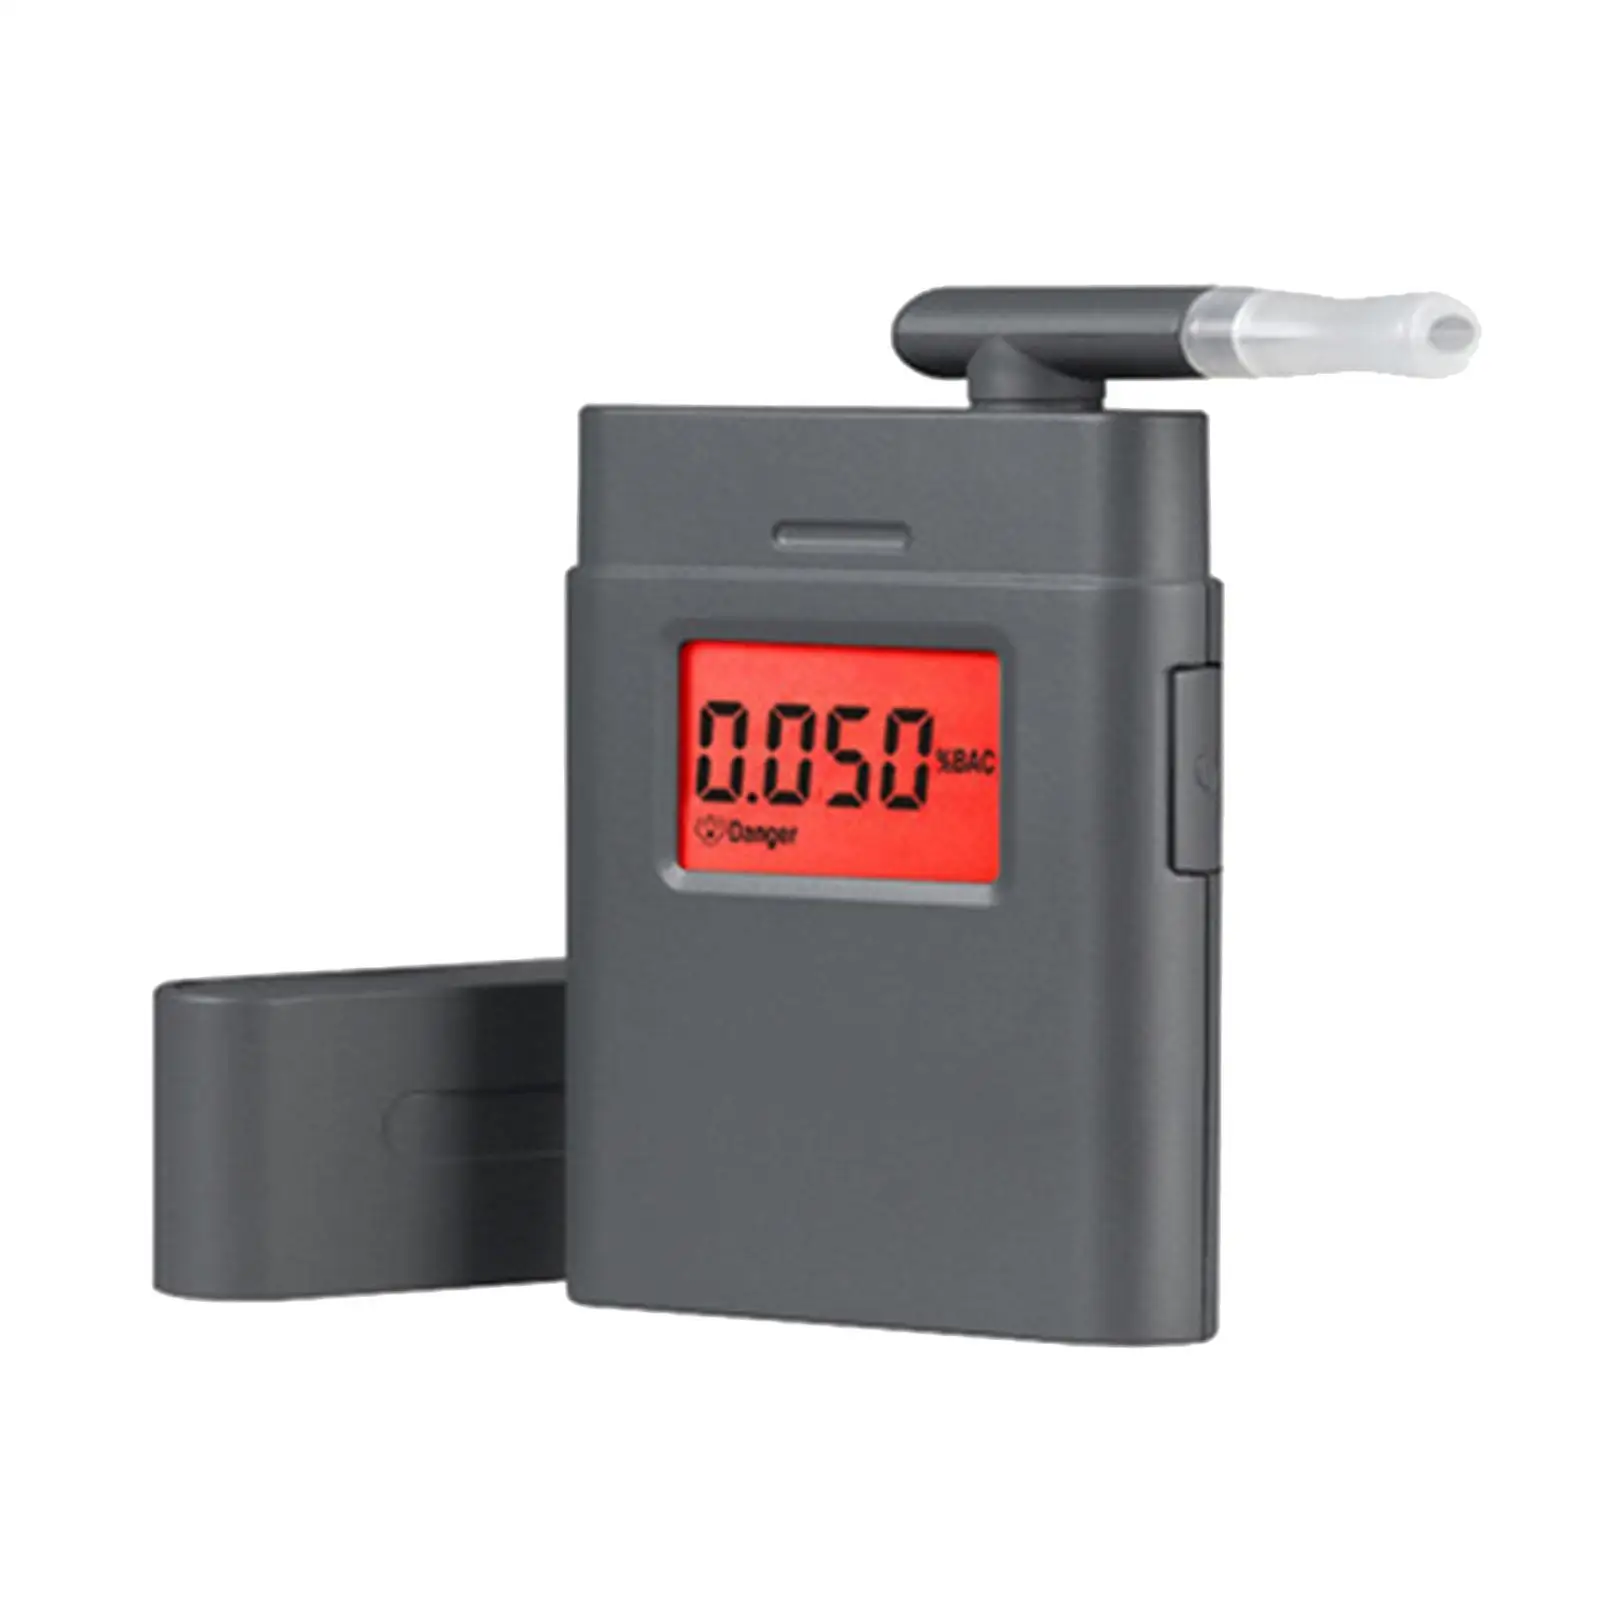 Portable Digital Alcohol Tester with Multiple Nozzles Lightweight 77x56x14mm Quick Response and Resume, Breath Checker